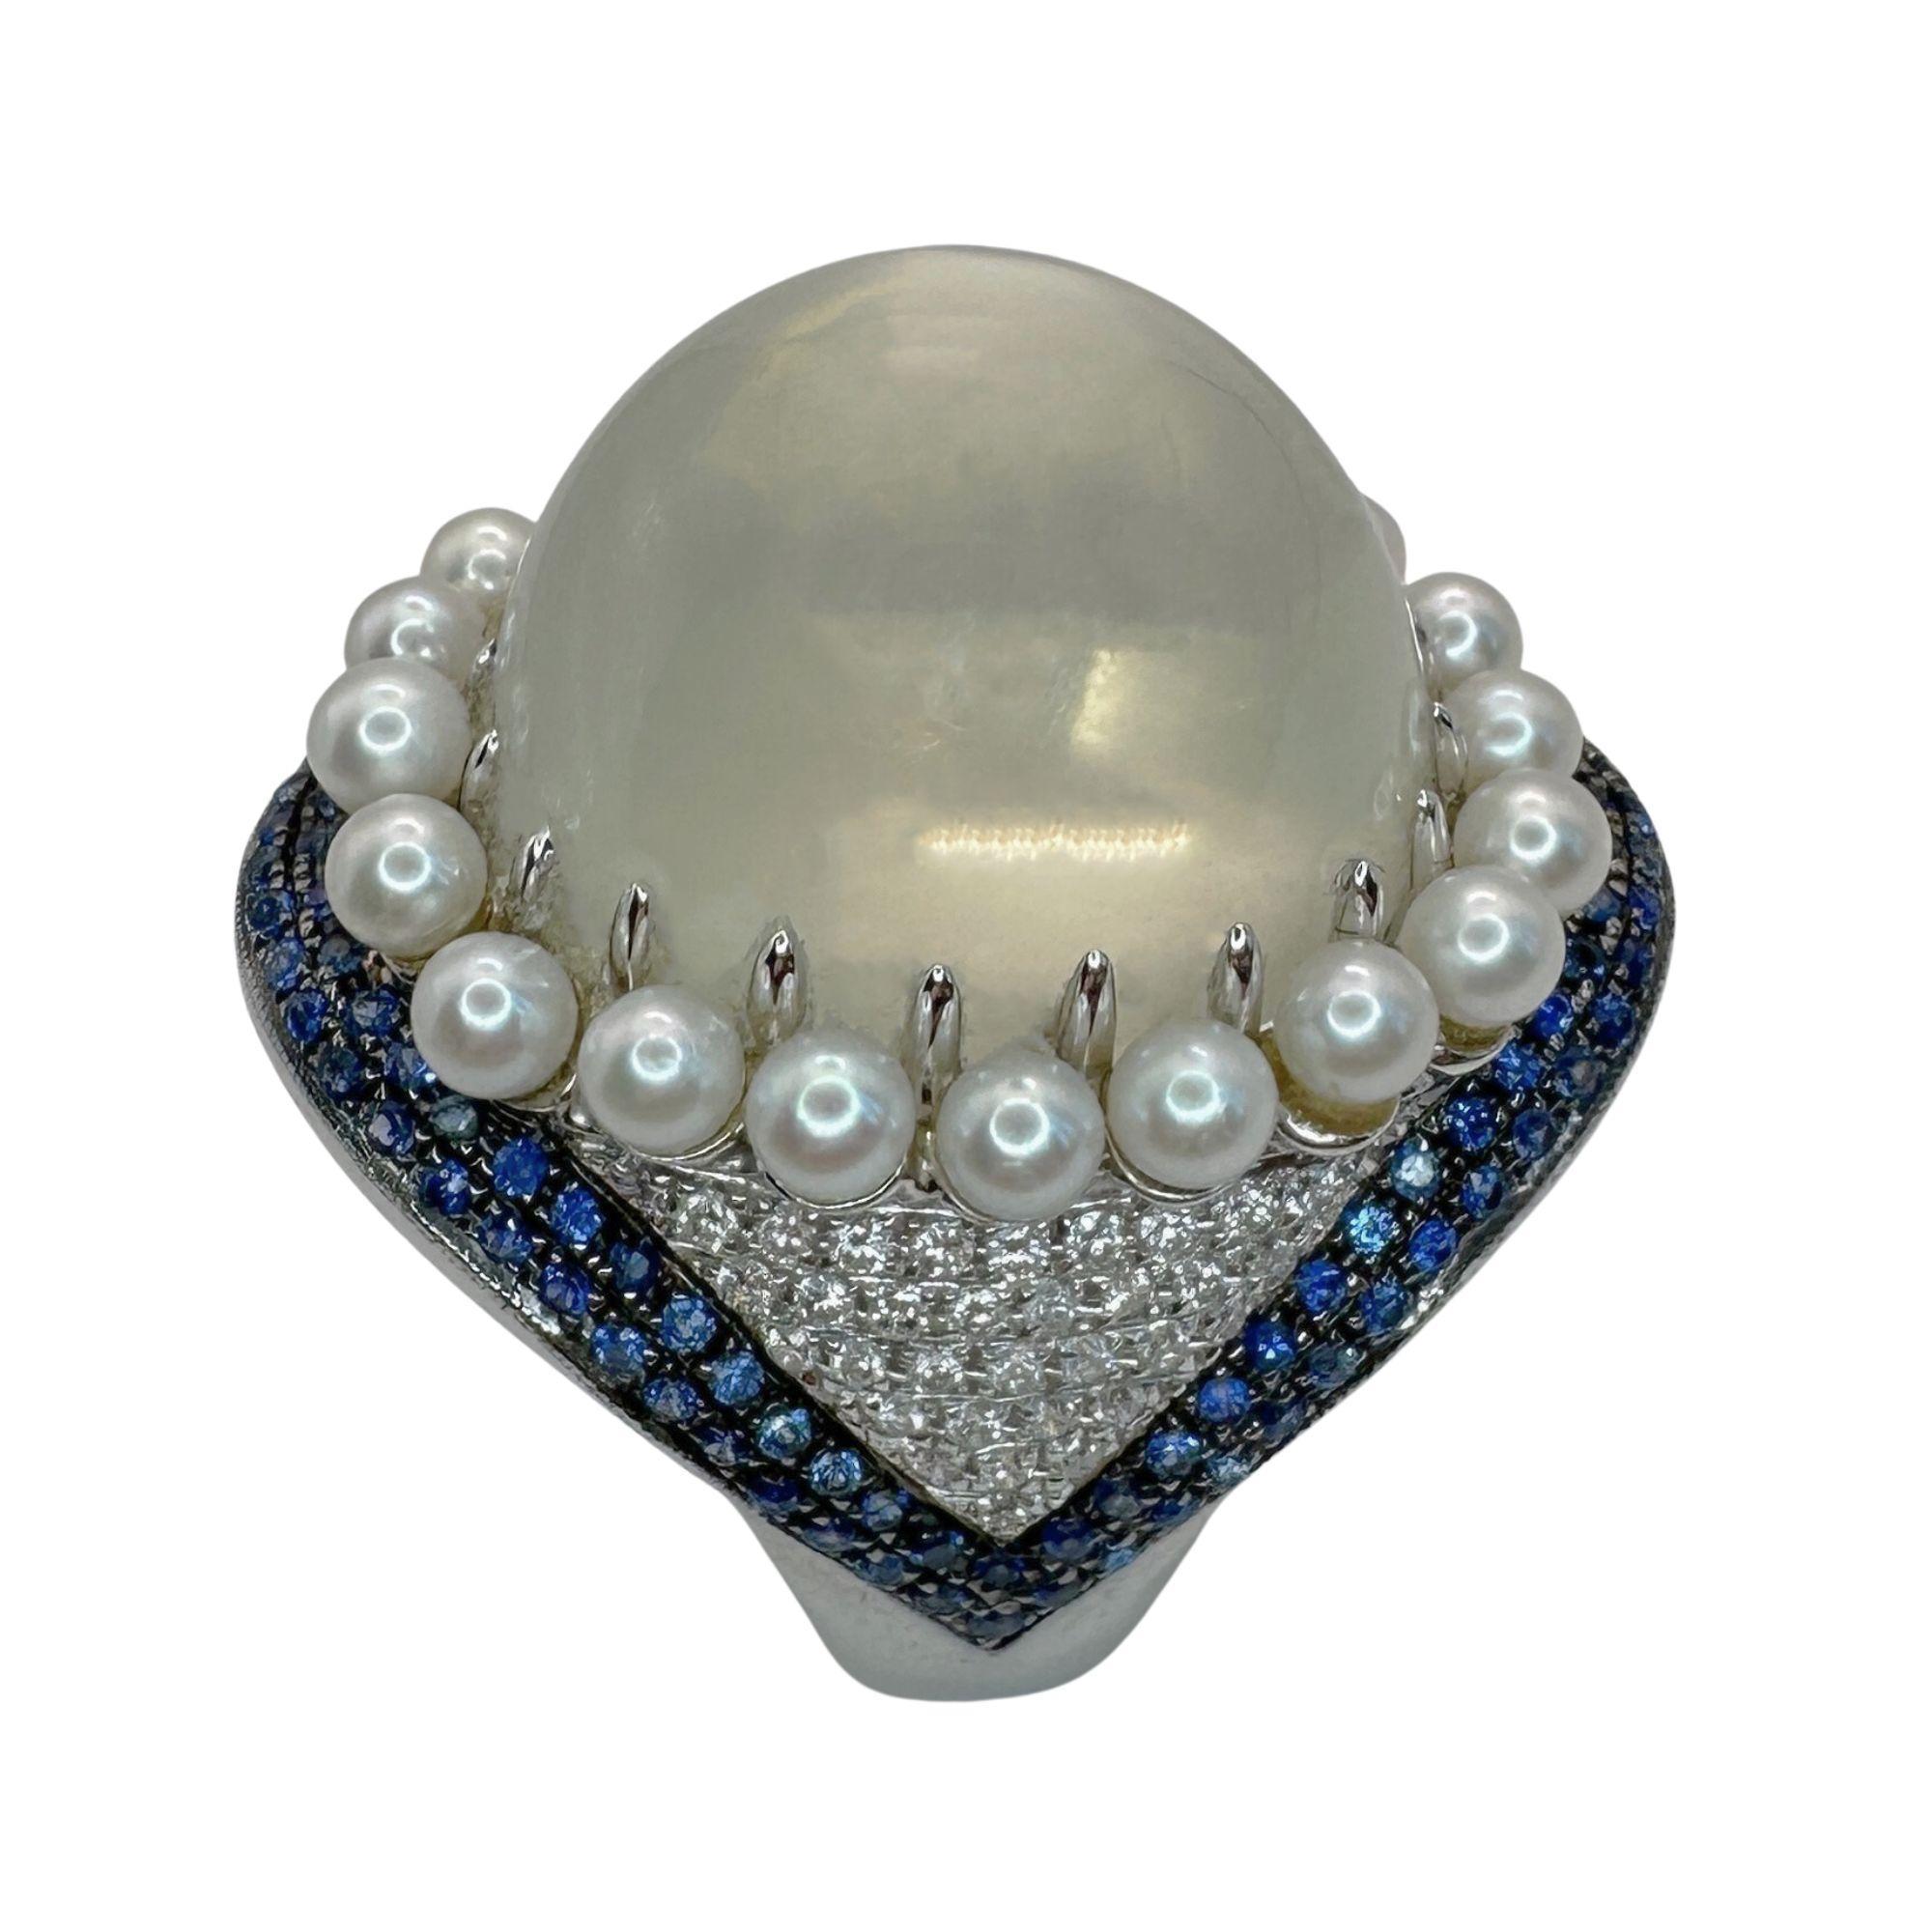 Introducing our 18k Pearl, Diamond, Sapphire and Moonstone Cocktail Ring. Crafted with 18k white gold and featuring 0.42 carats of diamonds, 37.38 carat moonstone center, and 0.82 carats of sapphires, this ring is a true statement piece. In